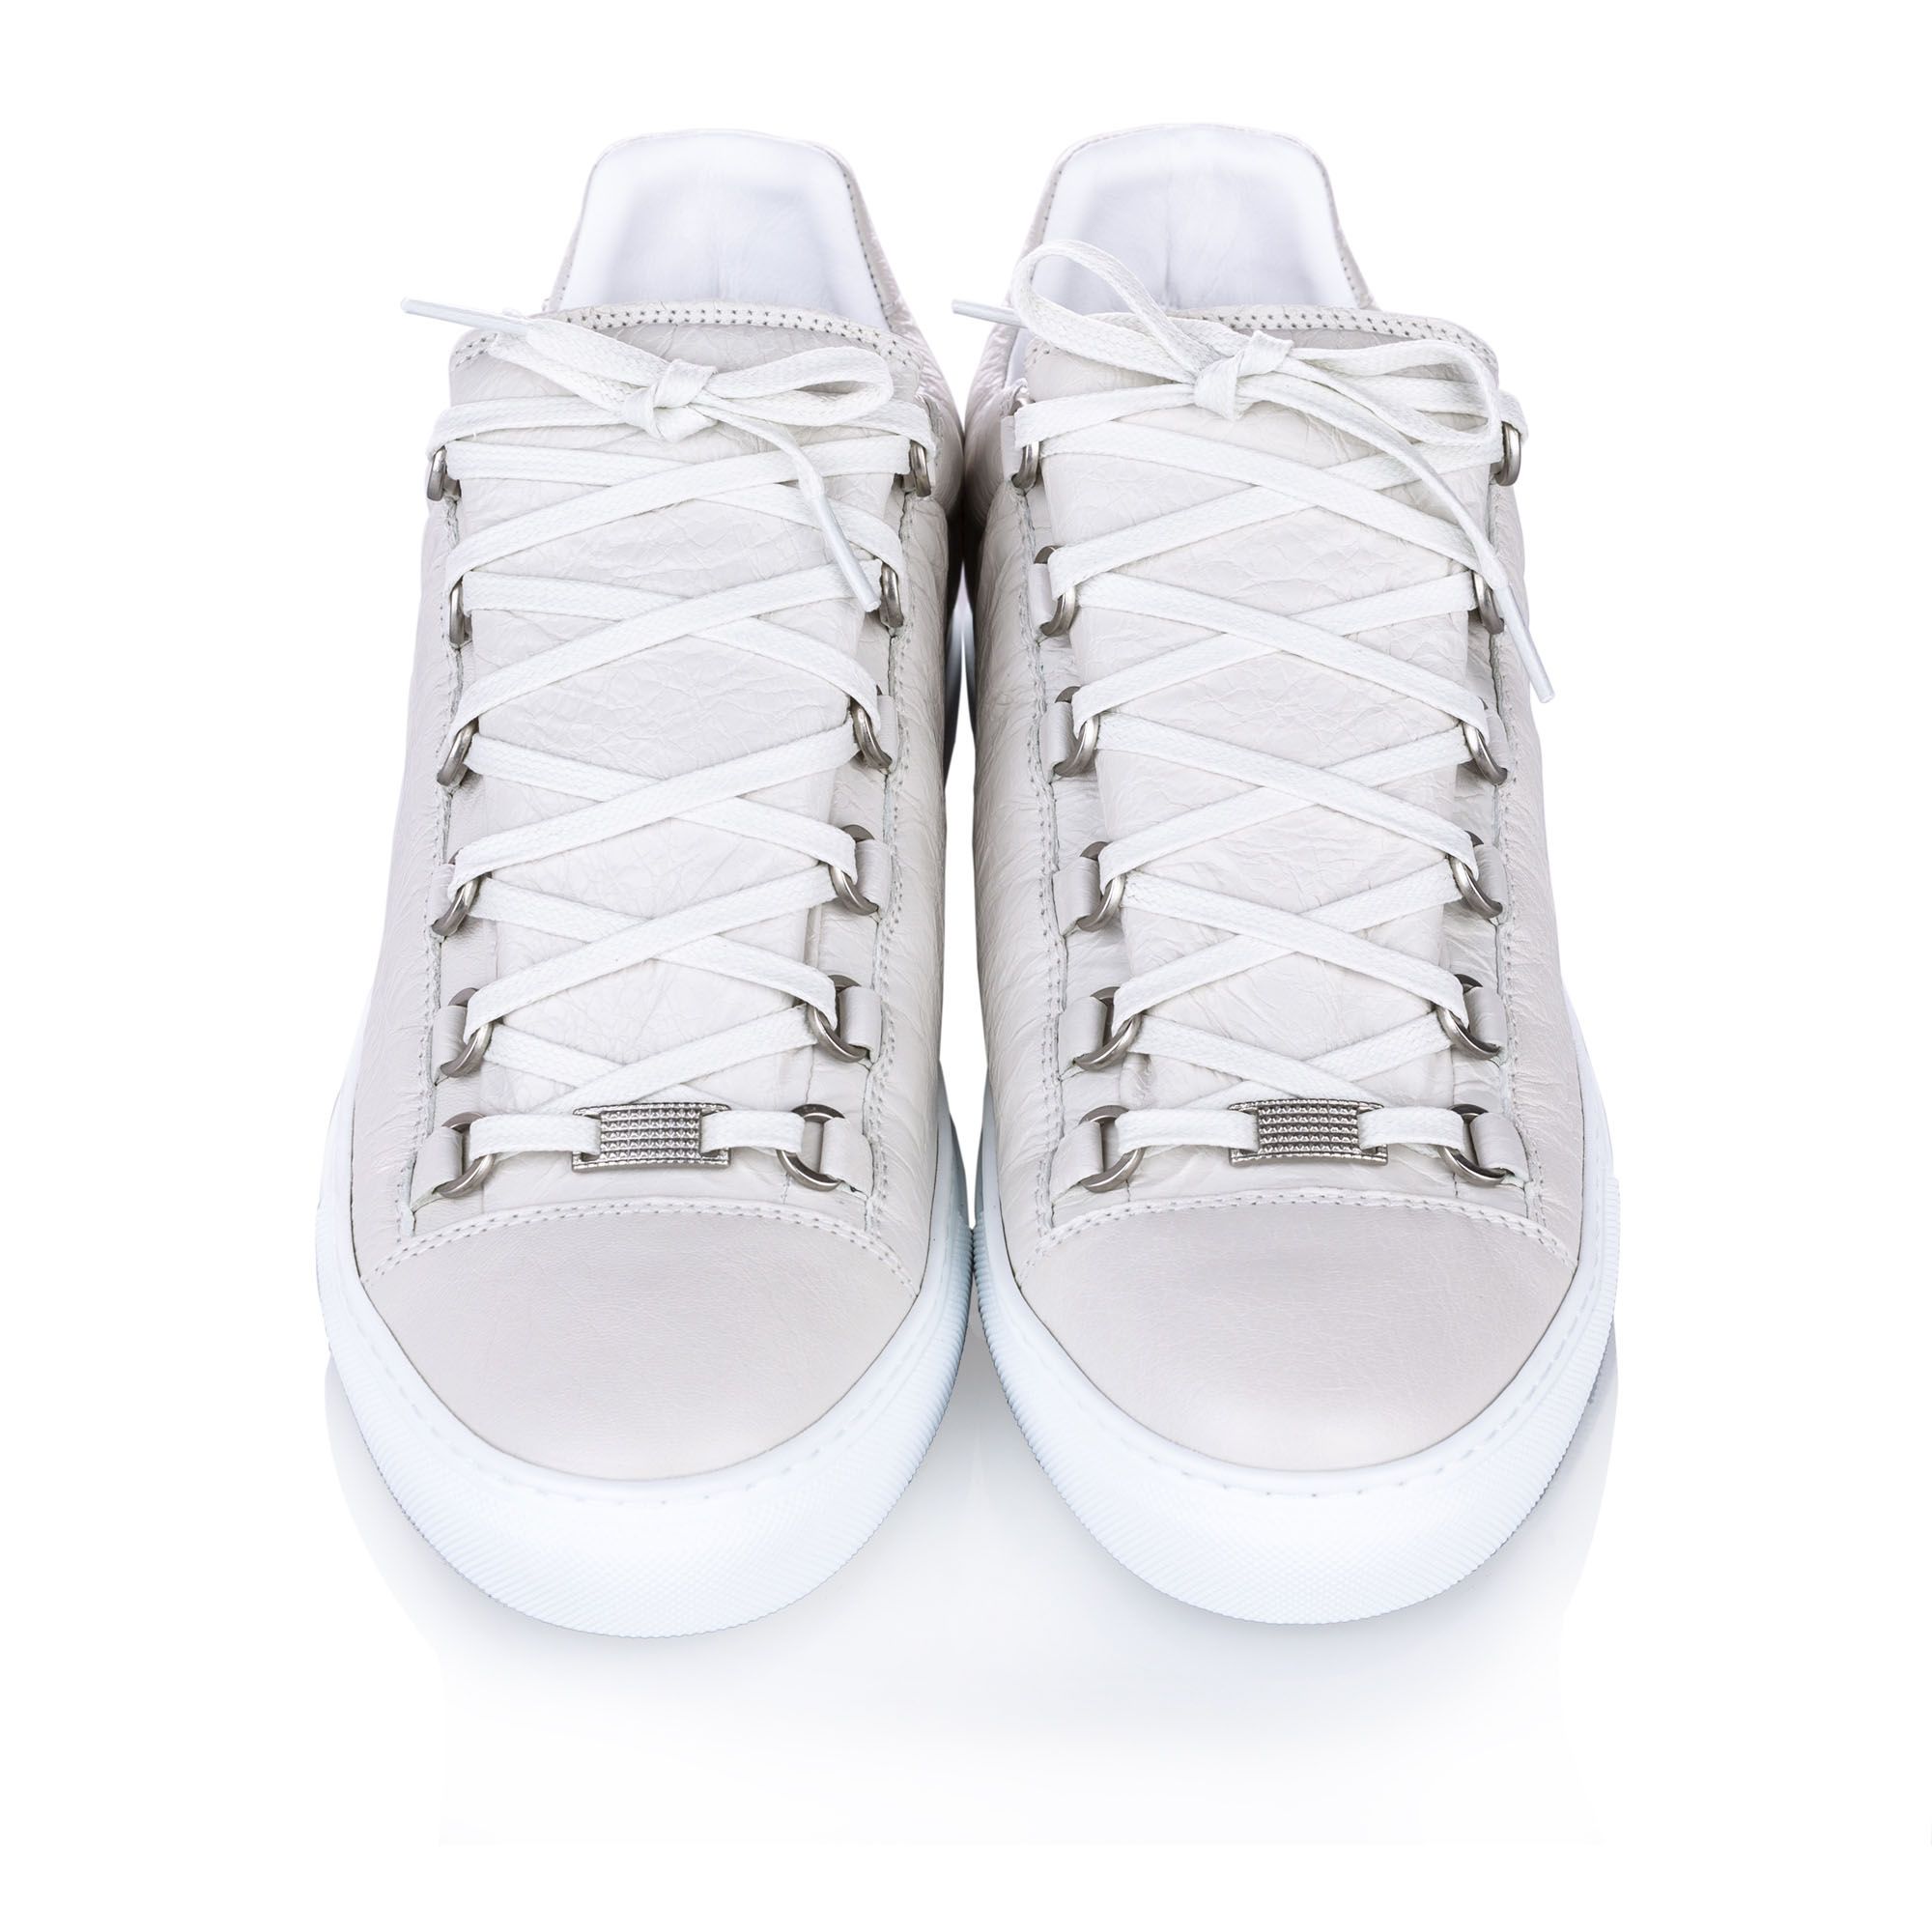  This sneaker features a leather upper, lace up detail, and rubber soles. Sole height: 2 cm.
Dimensions:
Length 26cm
Width 9.5cm

Original Accessories: Dust Bag, Box

Color: White
Material: Leather x Calf x Plastic x Others
Country of Origin: Spain
Boutique Reference: SSU78485K1342


Product Rating: New